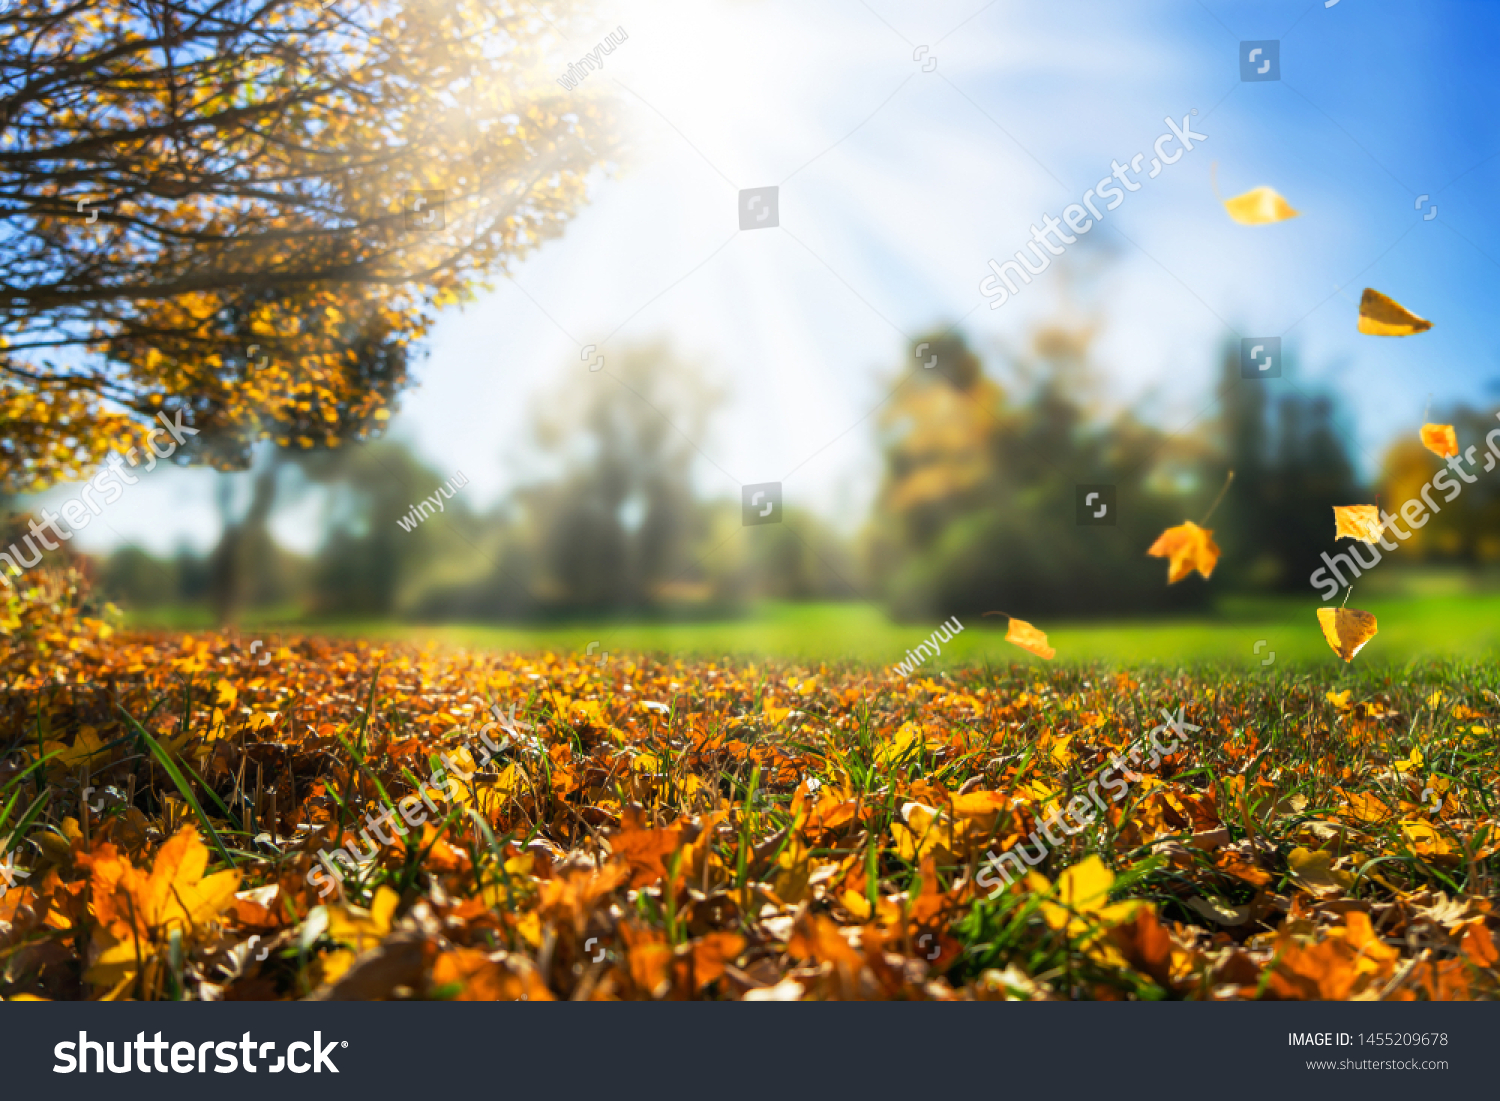 autumnal day in golden october, fall leaf, natural autumn background #1455209678